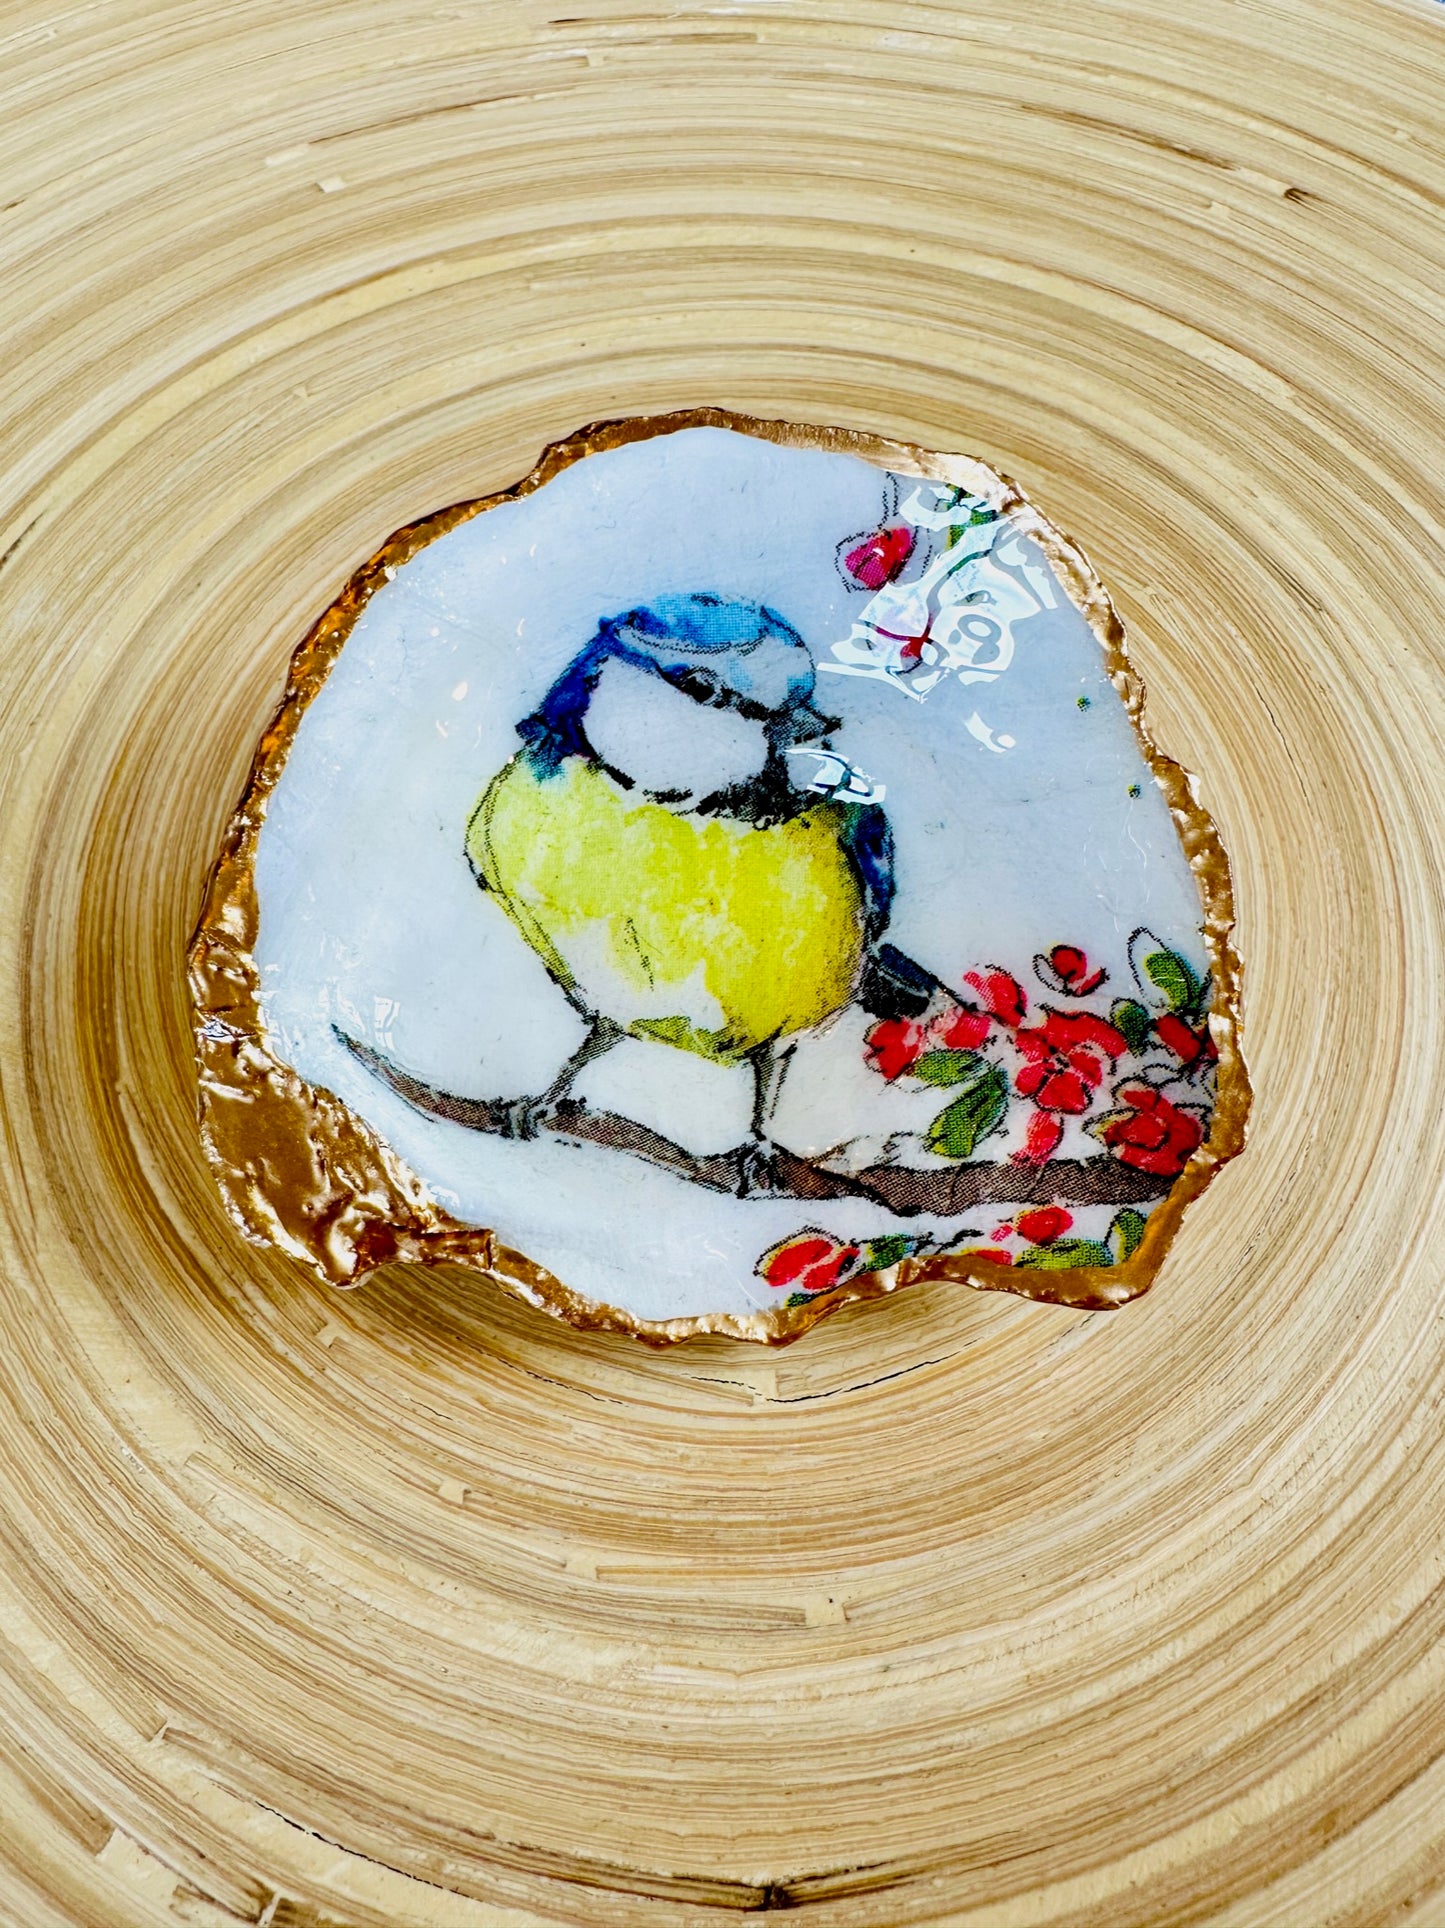 Blue Tit on Oyster Shell